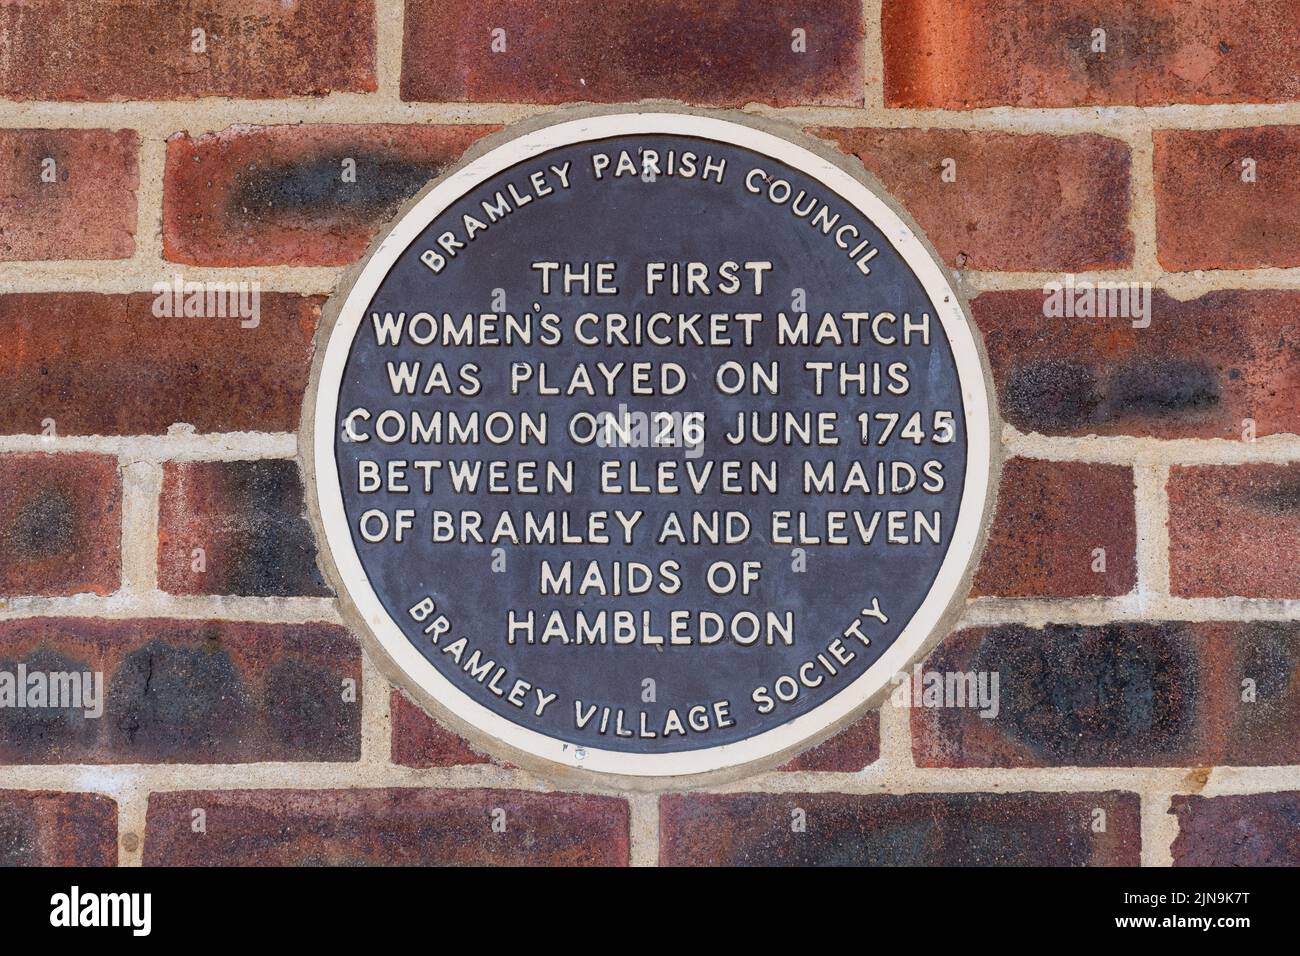 Plaque commemorating the first women's cricket match in 1745 on Bramley Village cricket club building, Gosden Common, Surrey, England, UK Stock Photo